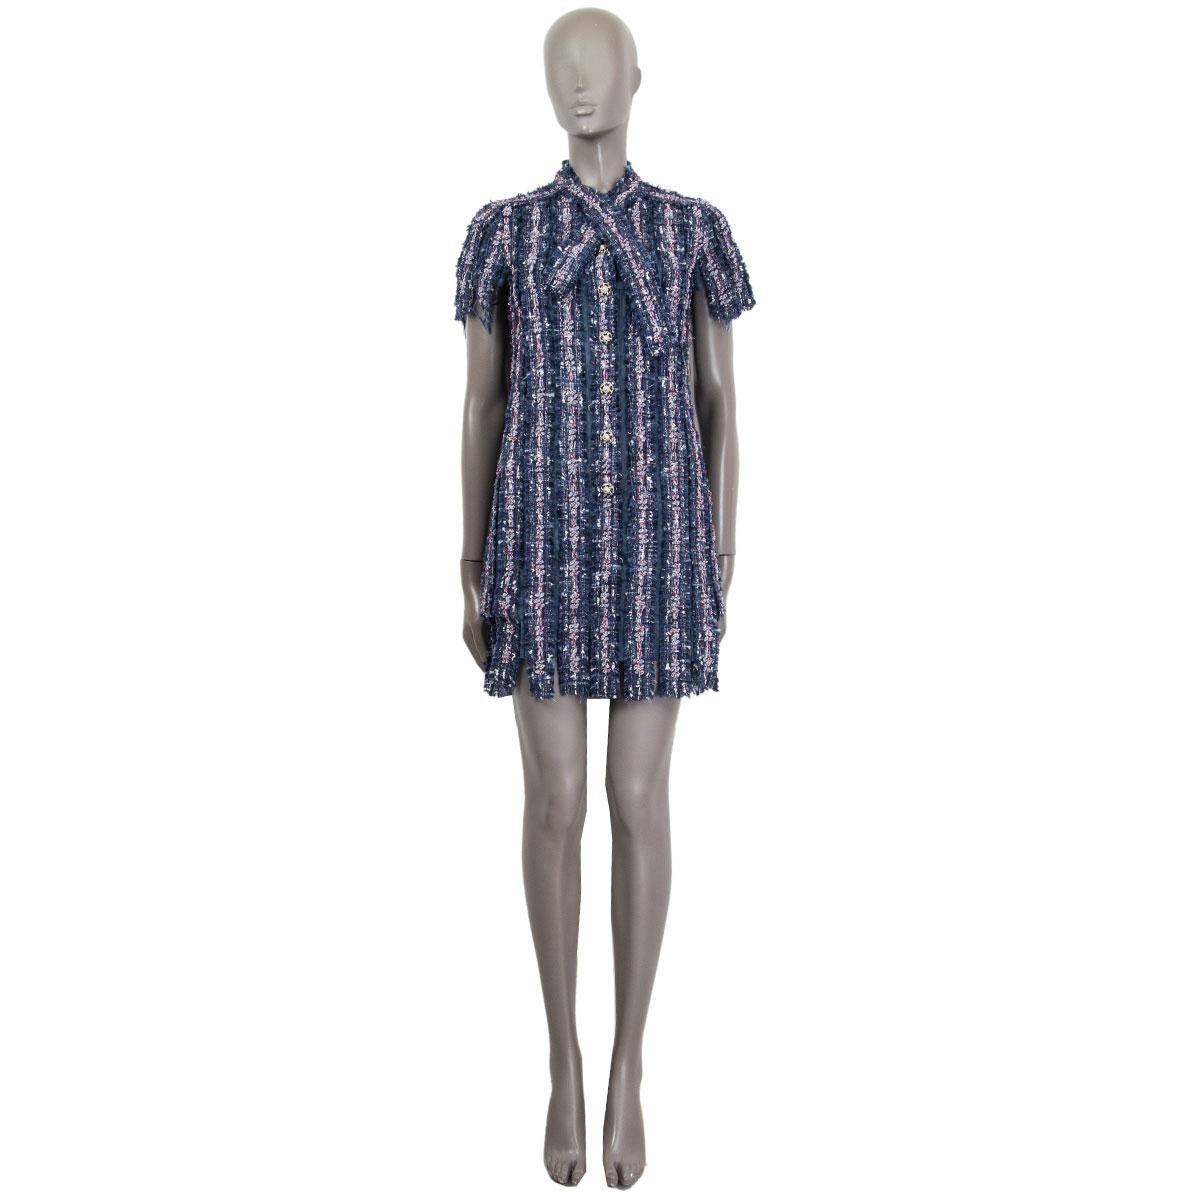 100% authentic Chanel bottoned shortsleeve pussy-bow dress in polyester (75%), cotton (25%) main fabric. Bouclé panels are made of cotton (52%), polyester (34%), polyamide (9%), rayon (3%) and wool (2%).  Has seven silver-tone CC chain-link metal